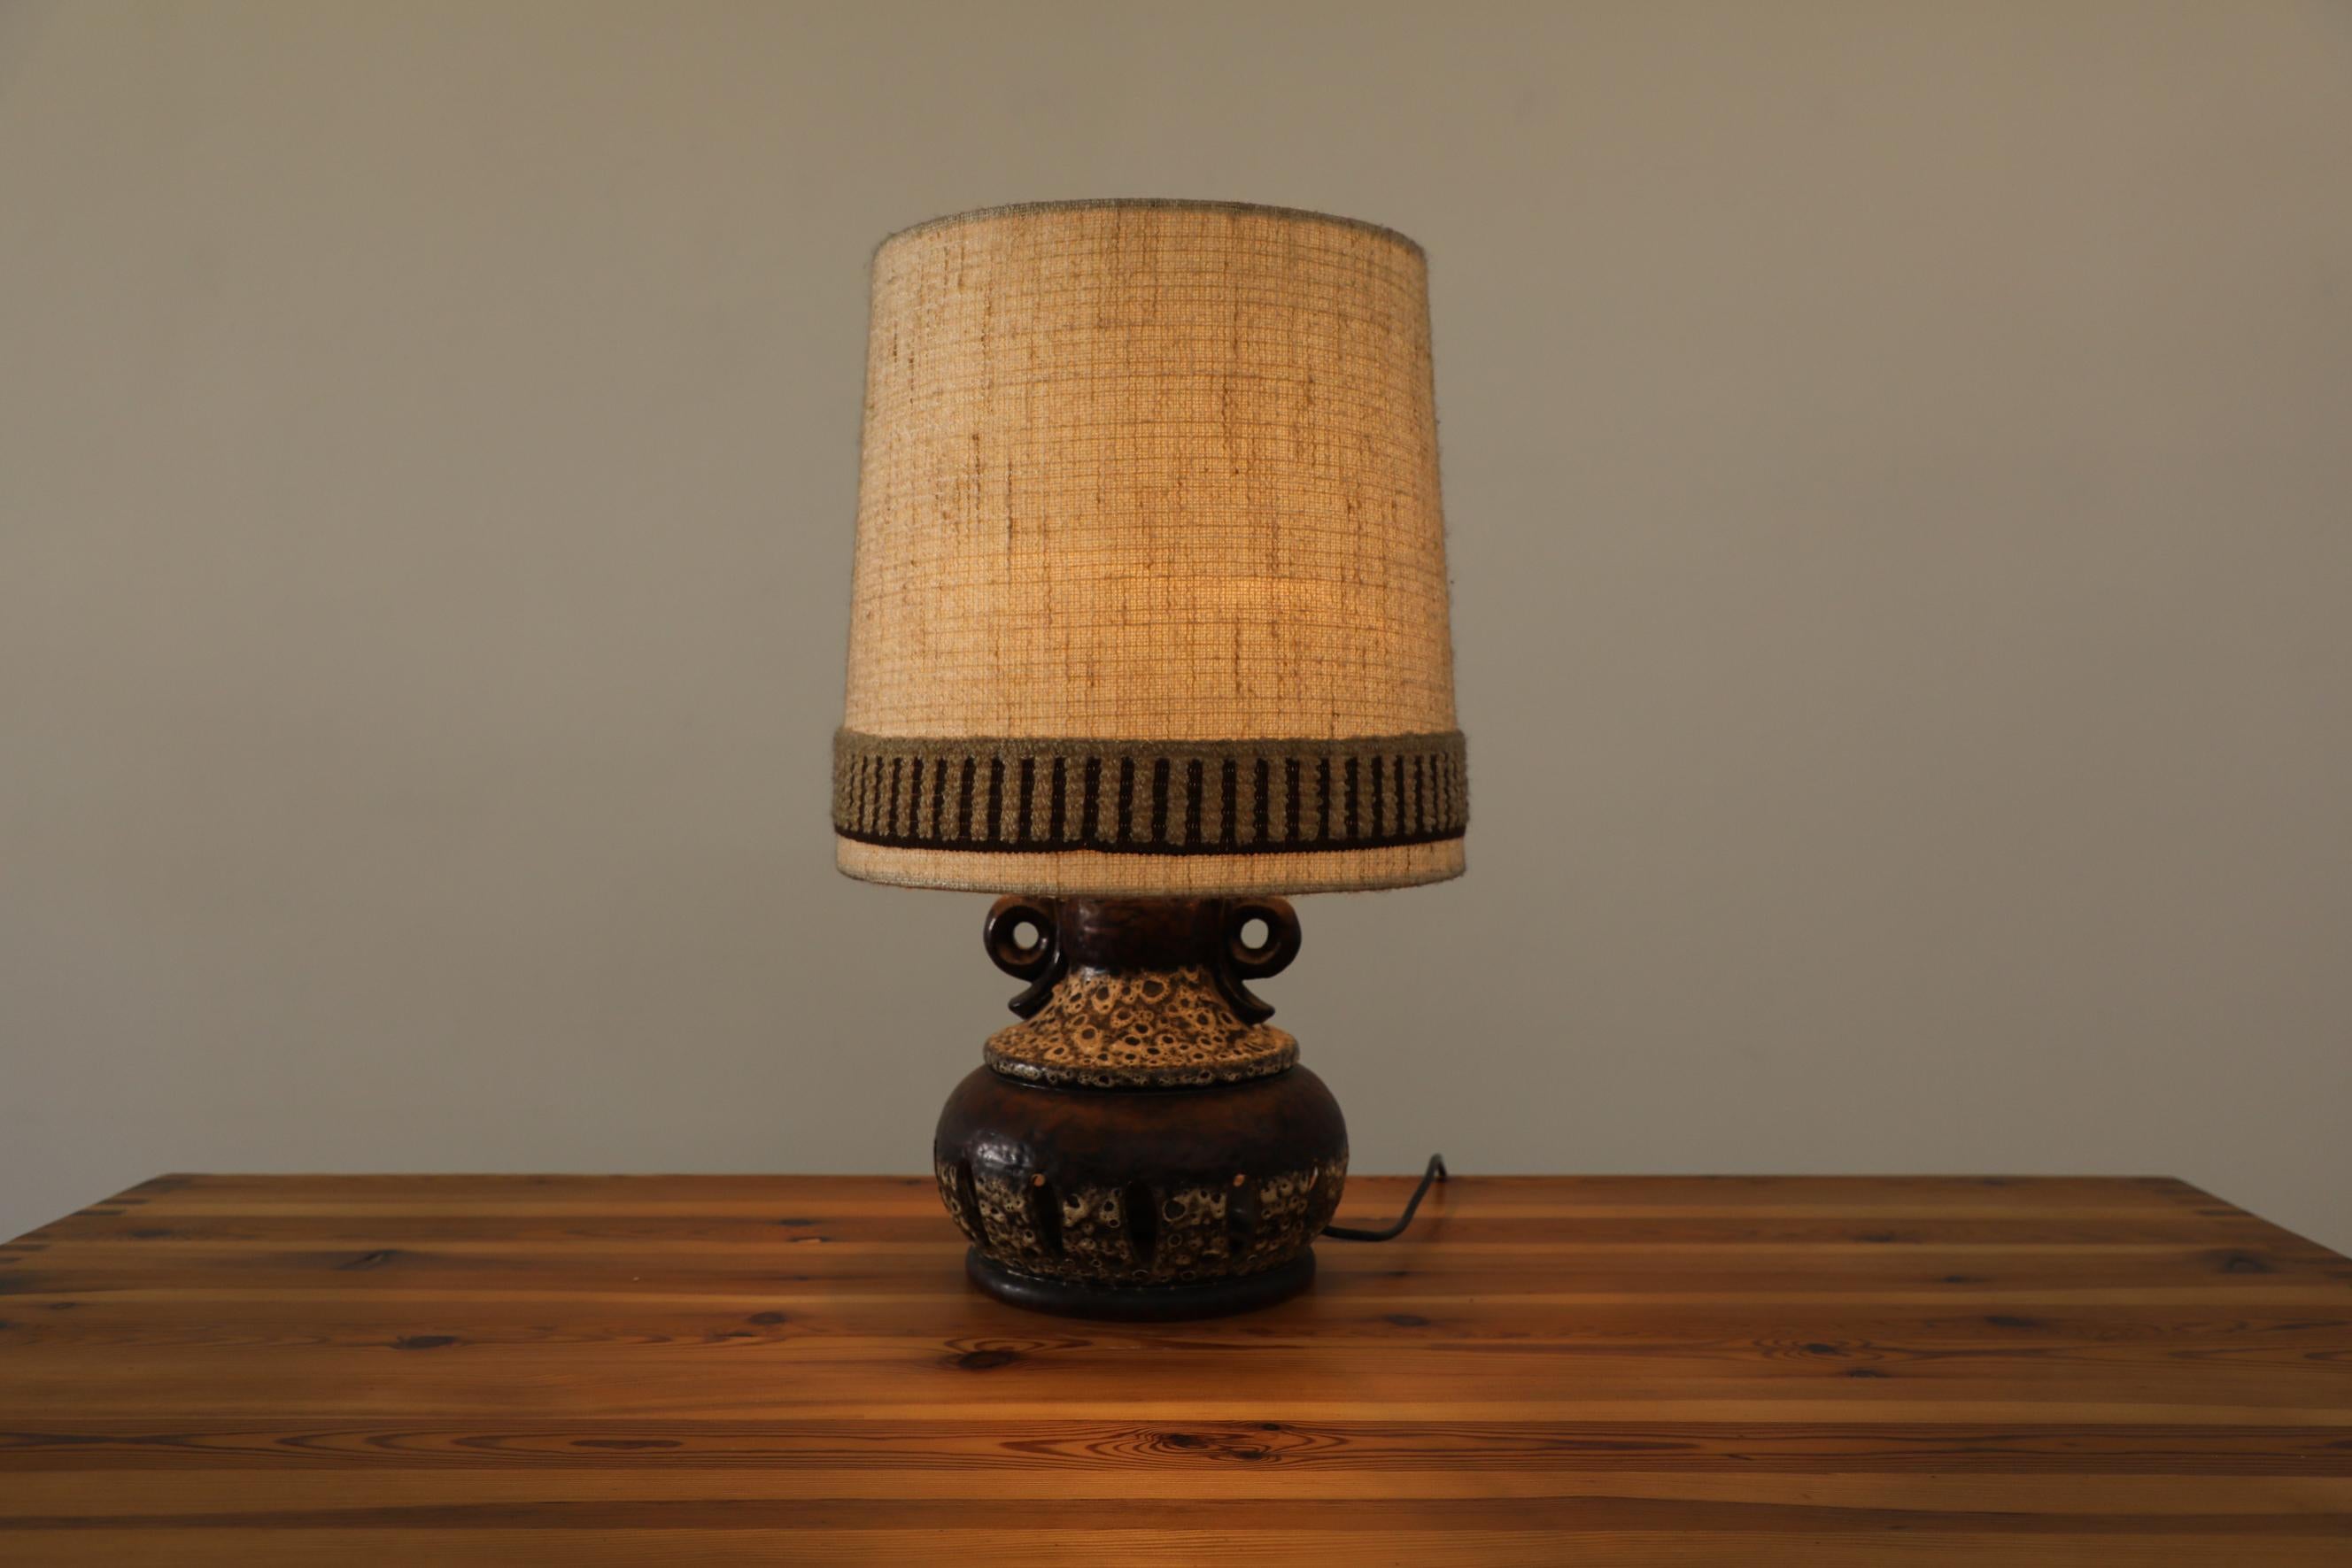 Late 20th Century Midcentury W. German Ceramic Table Lamp with Cut-Outs